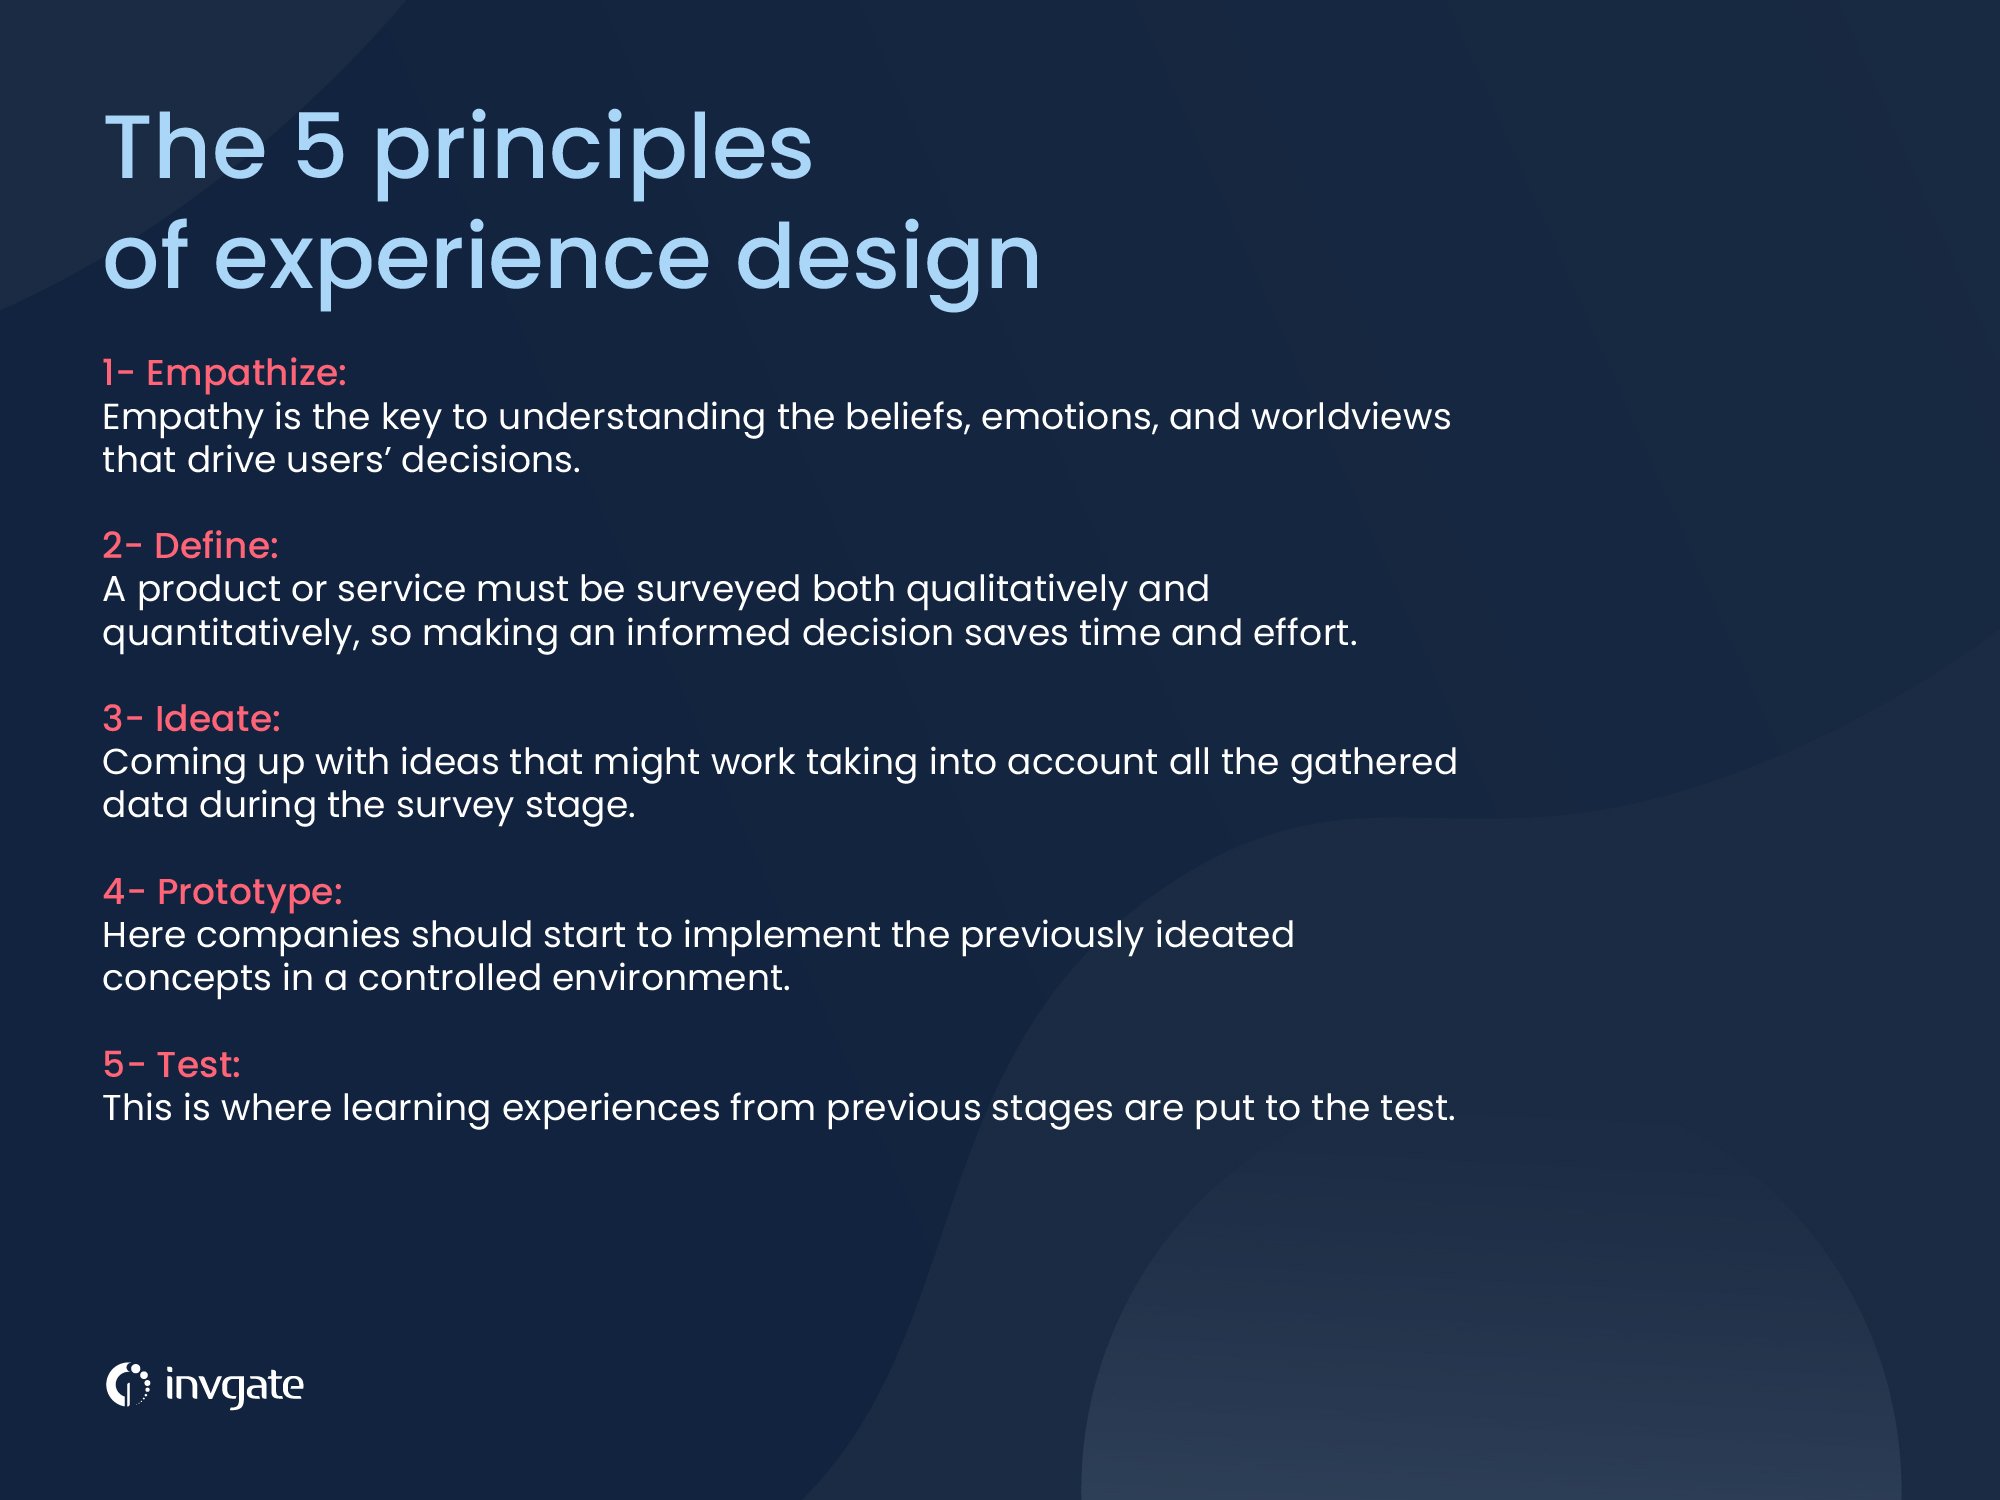 The 5 principles of experience design